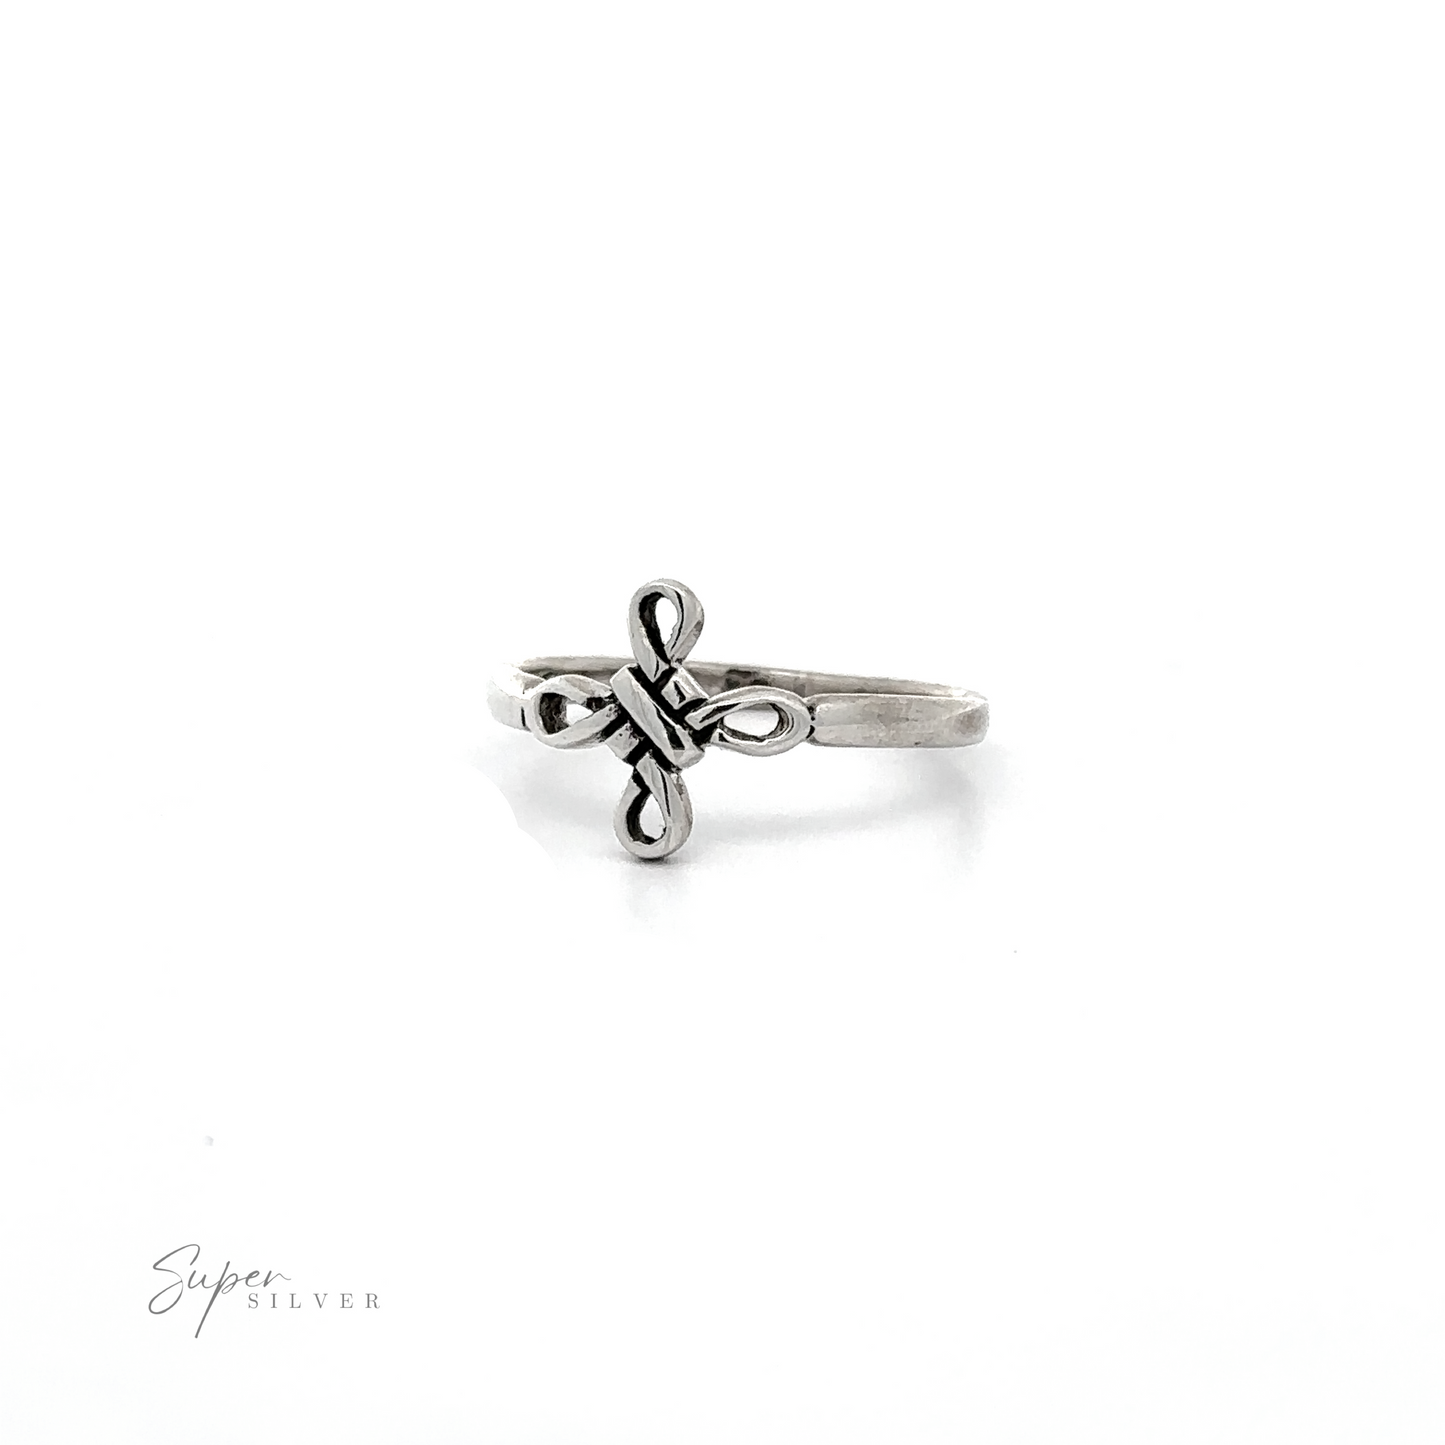 A sterling silver Simple Celtic Four Knot ring with a cross on it.